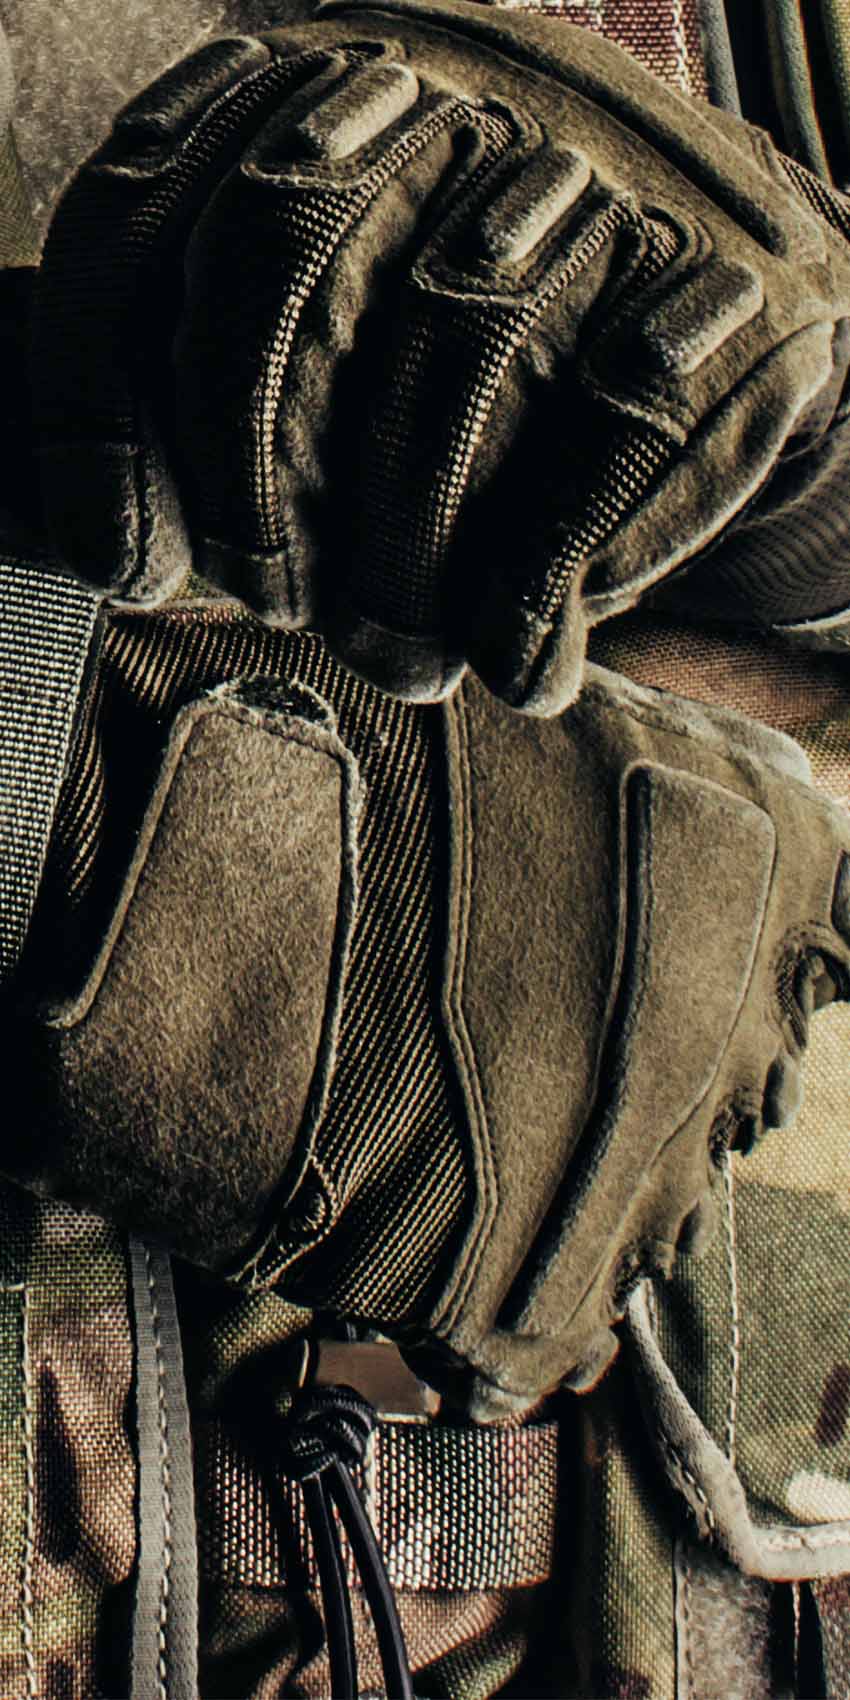 Soldier in camouflage strapping on gloves